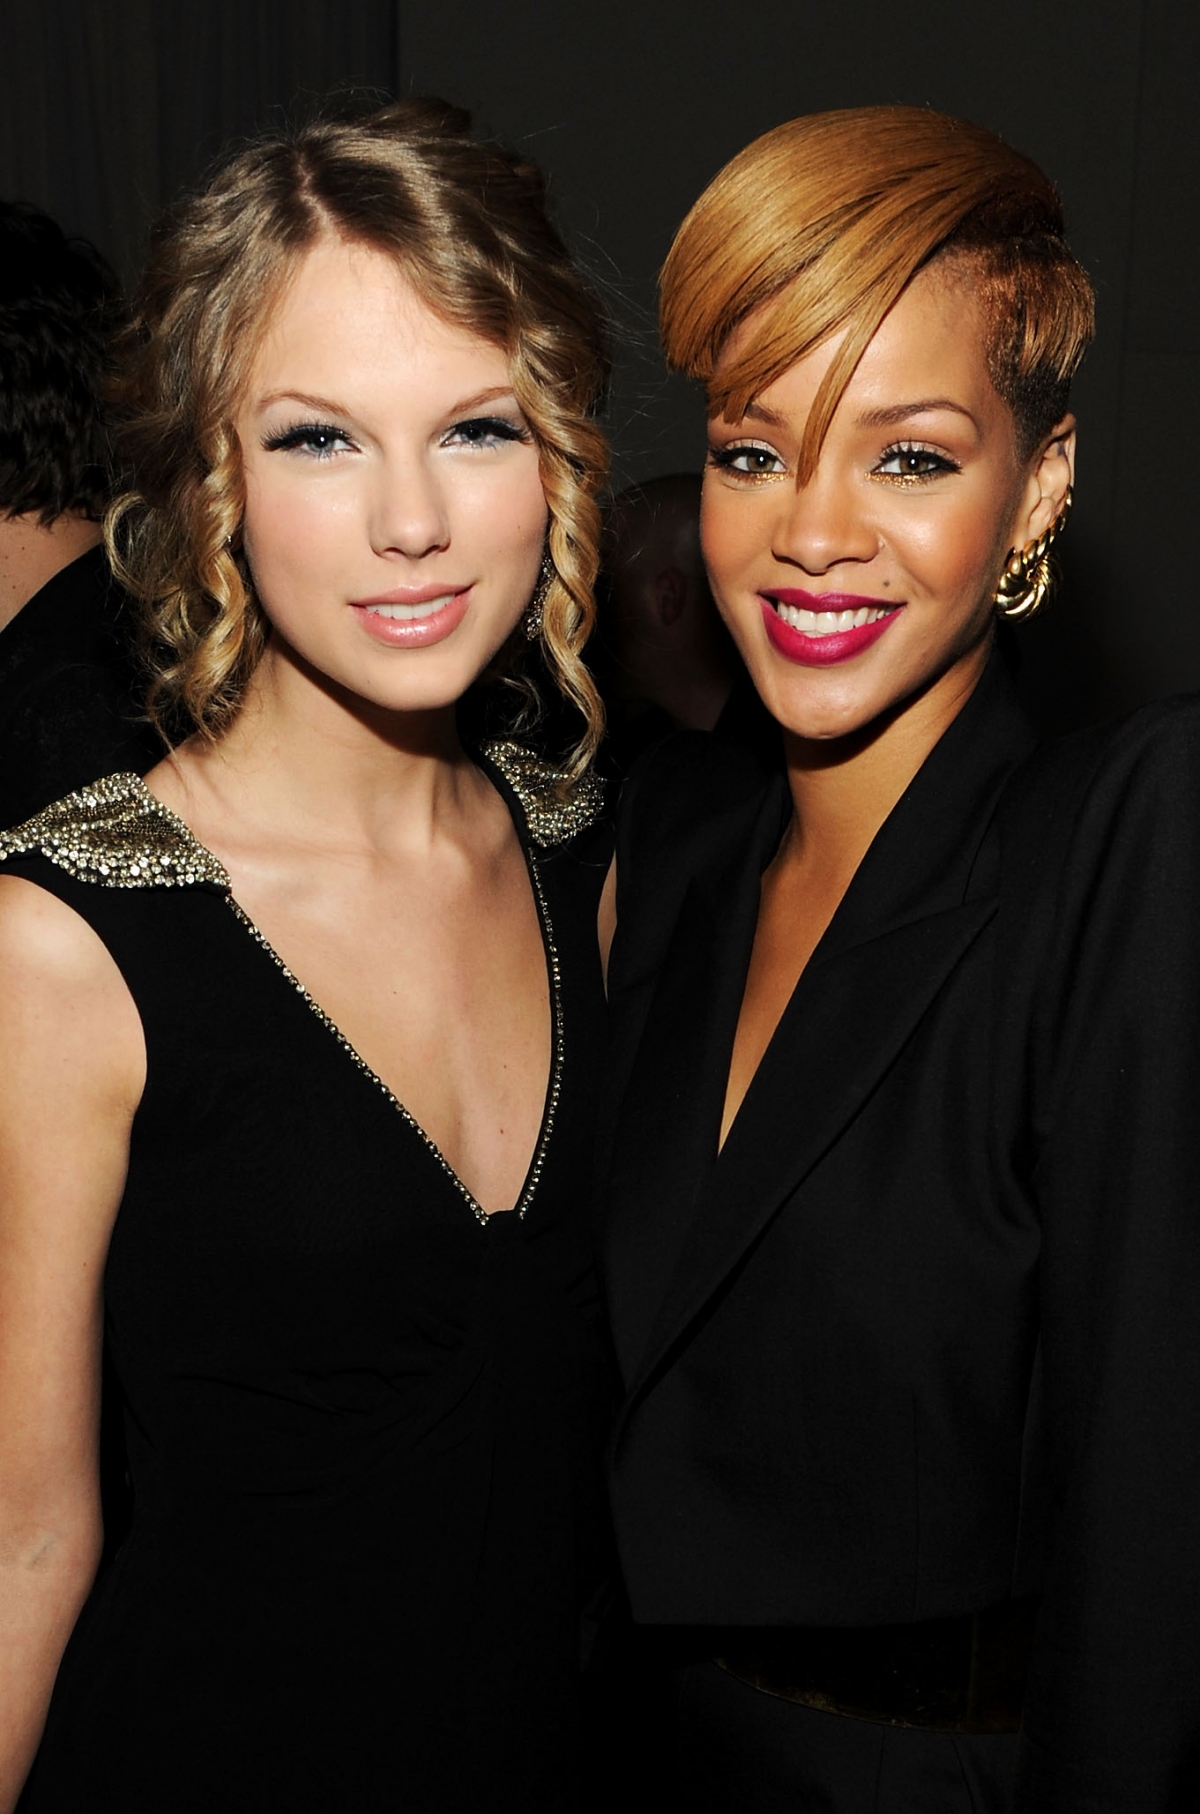 Rihanna will not join Taylor Swift on stage: Revenge for dissing Katy Perry?